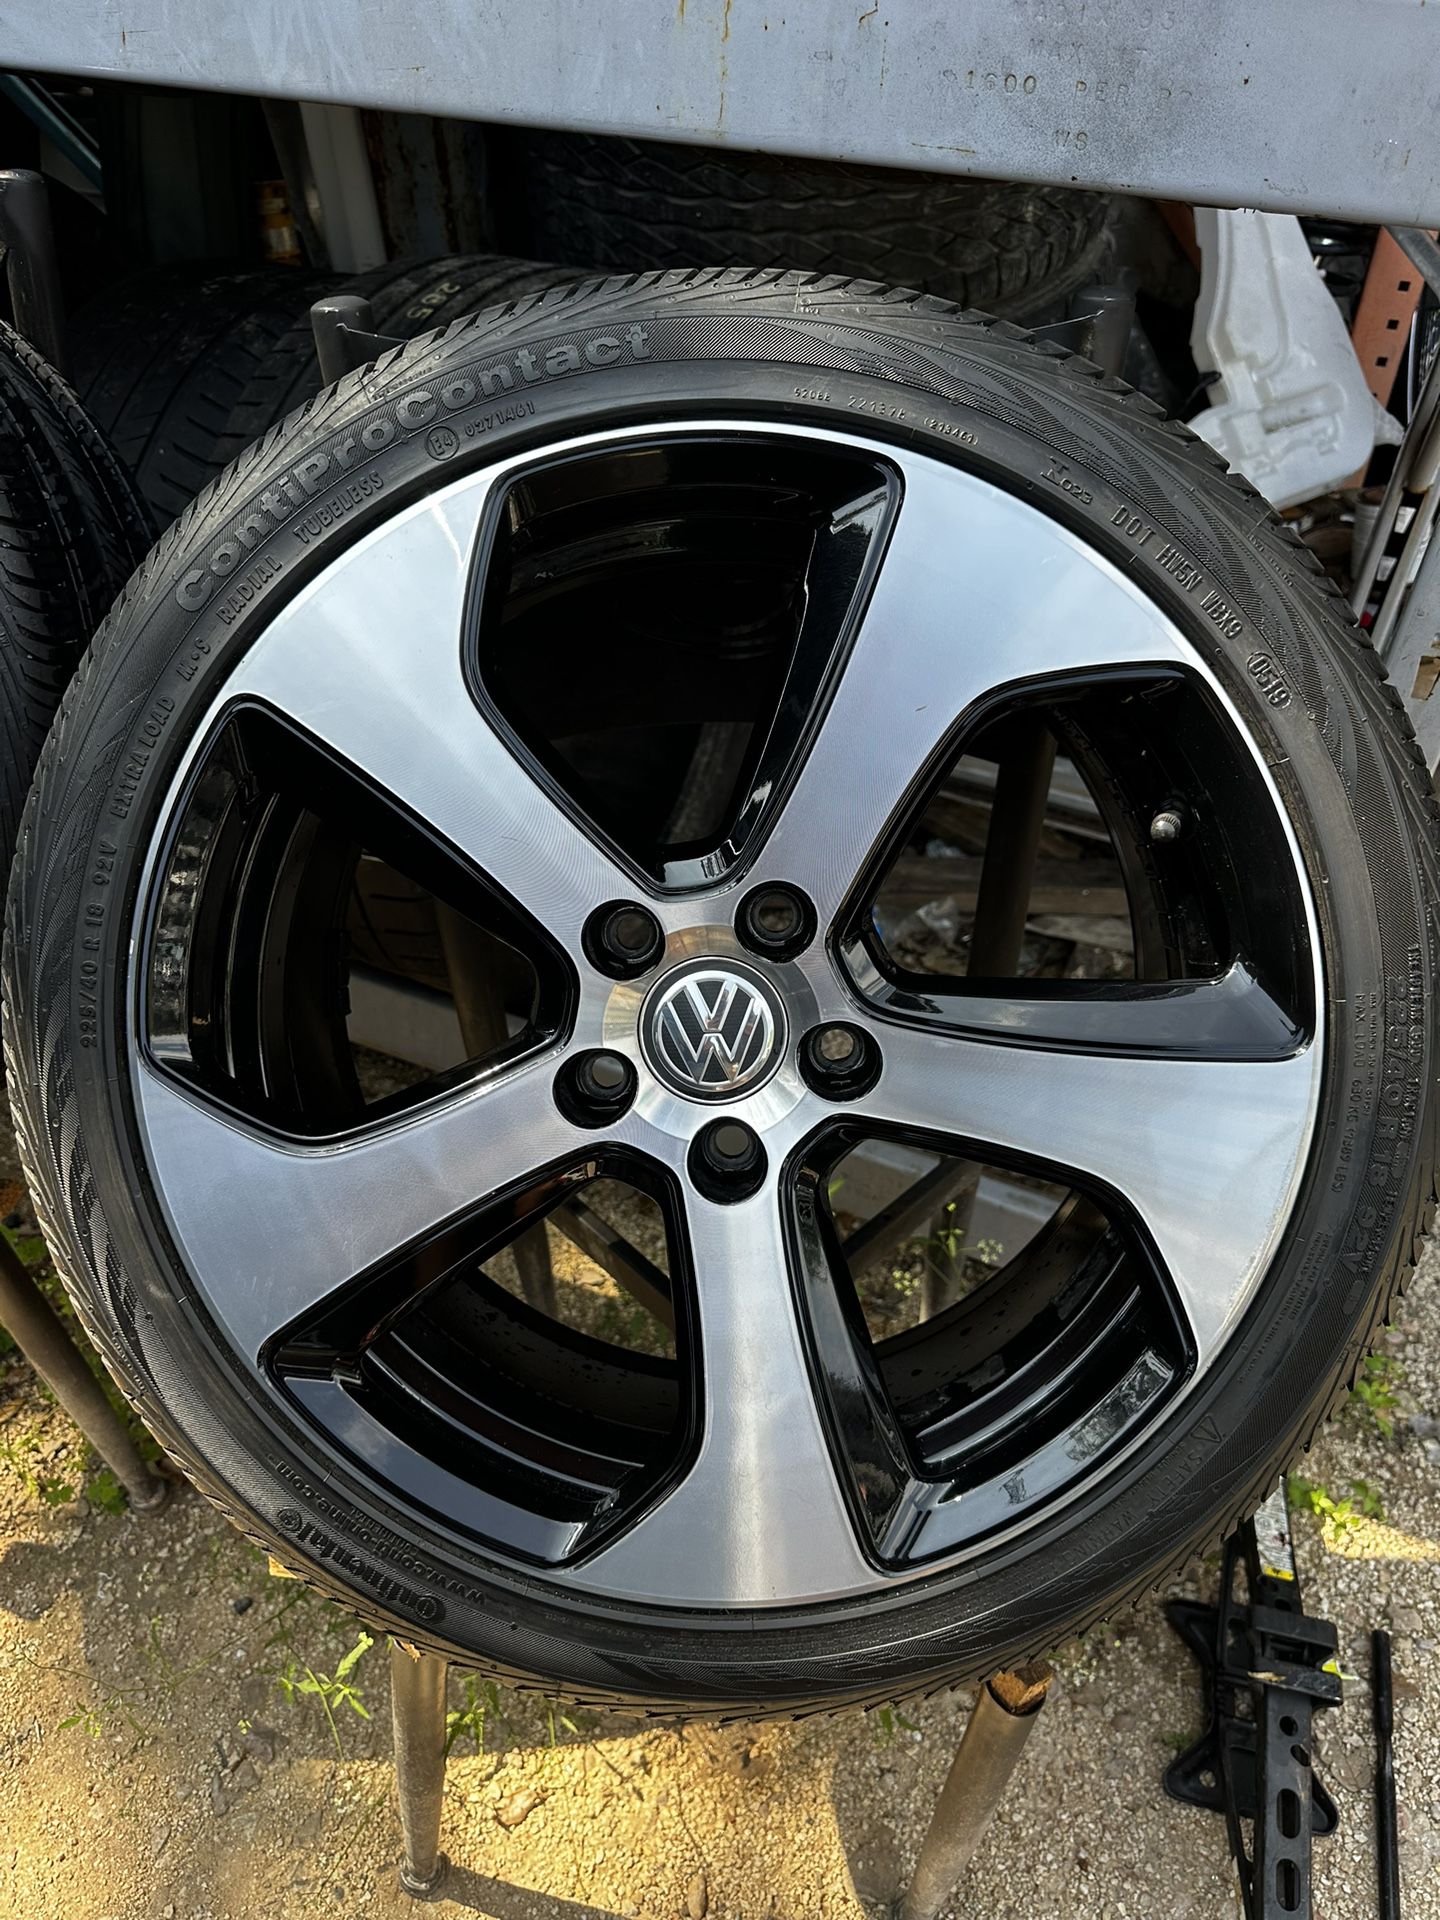 Brand New Conditions VW Wheels And Tires Set -$1200